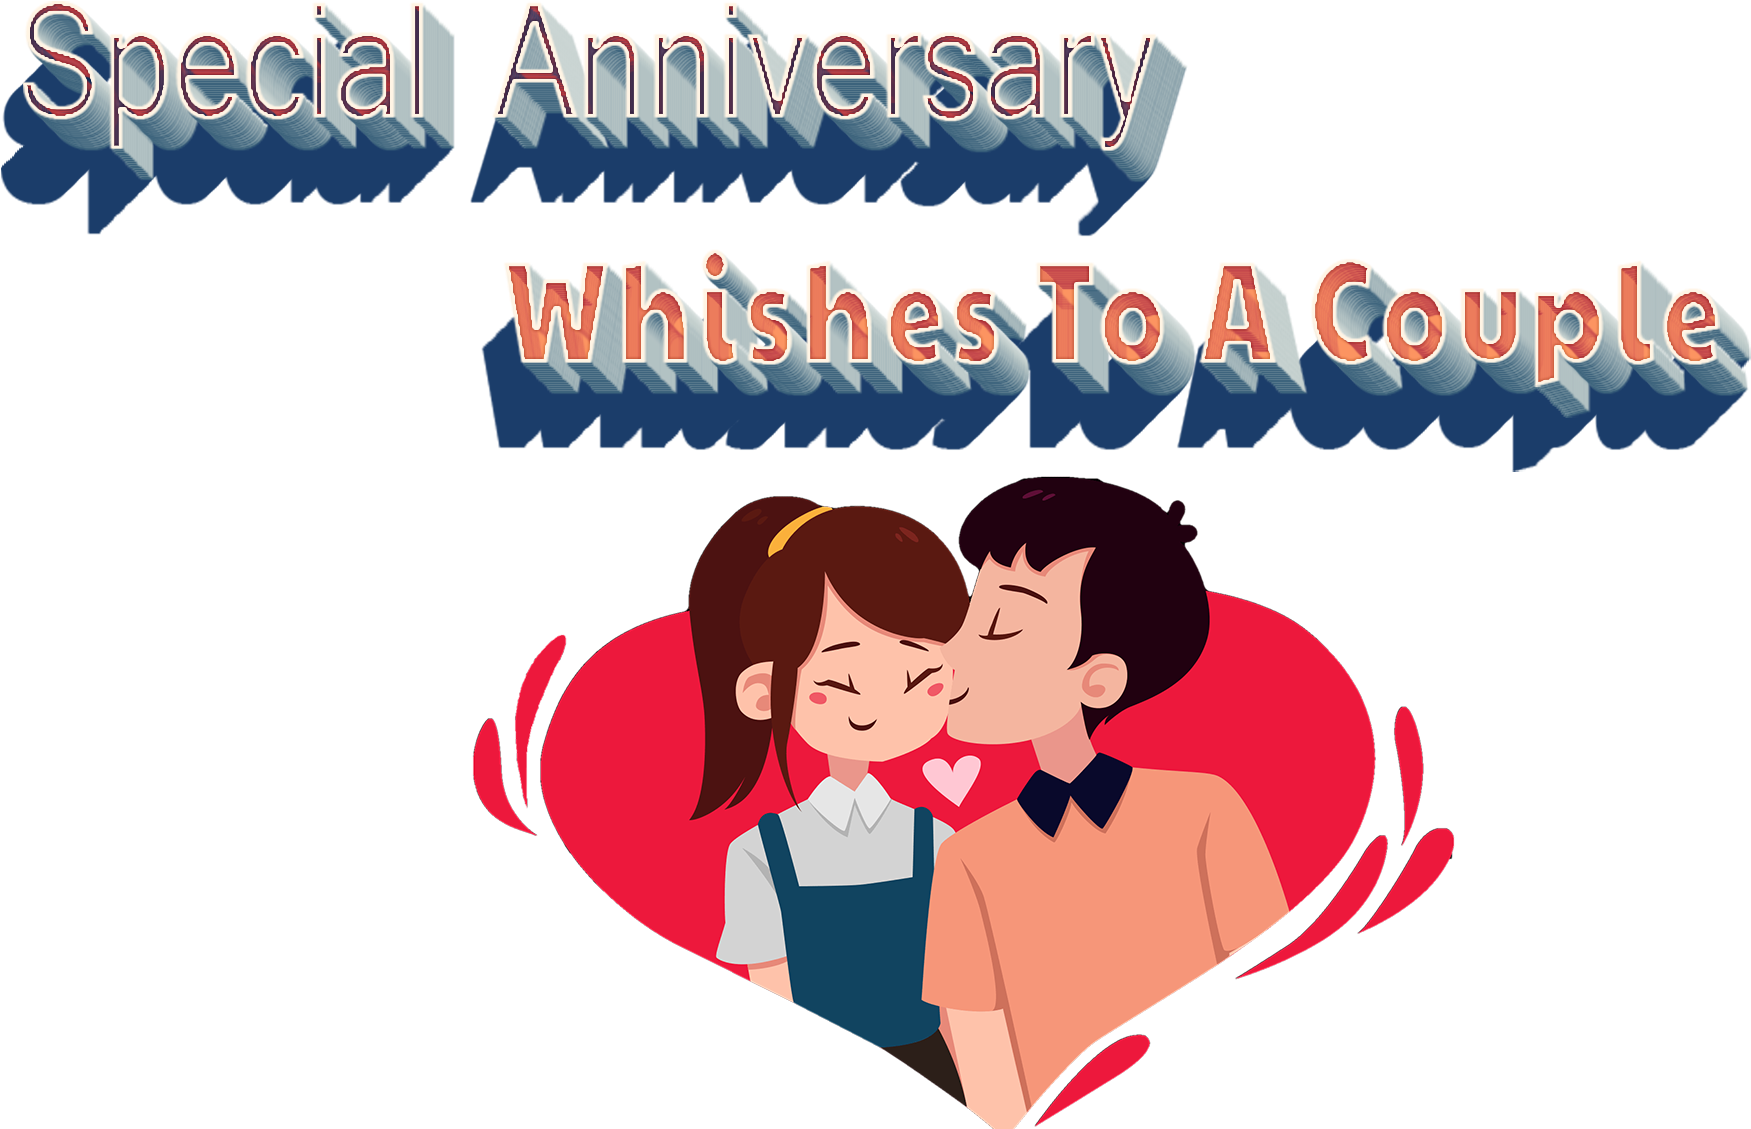 Special Anniversary Wishes Cartoon Couple PNG image